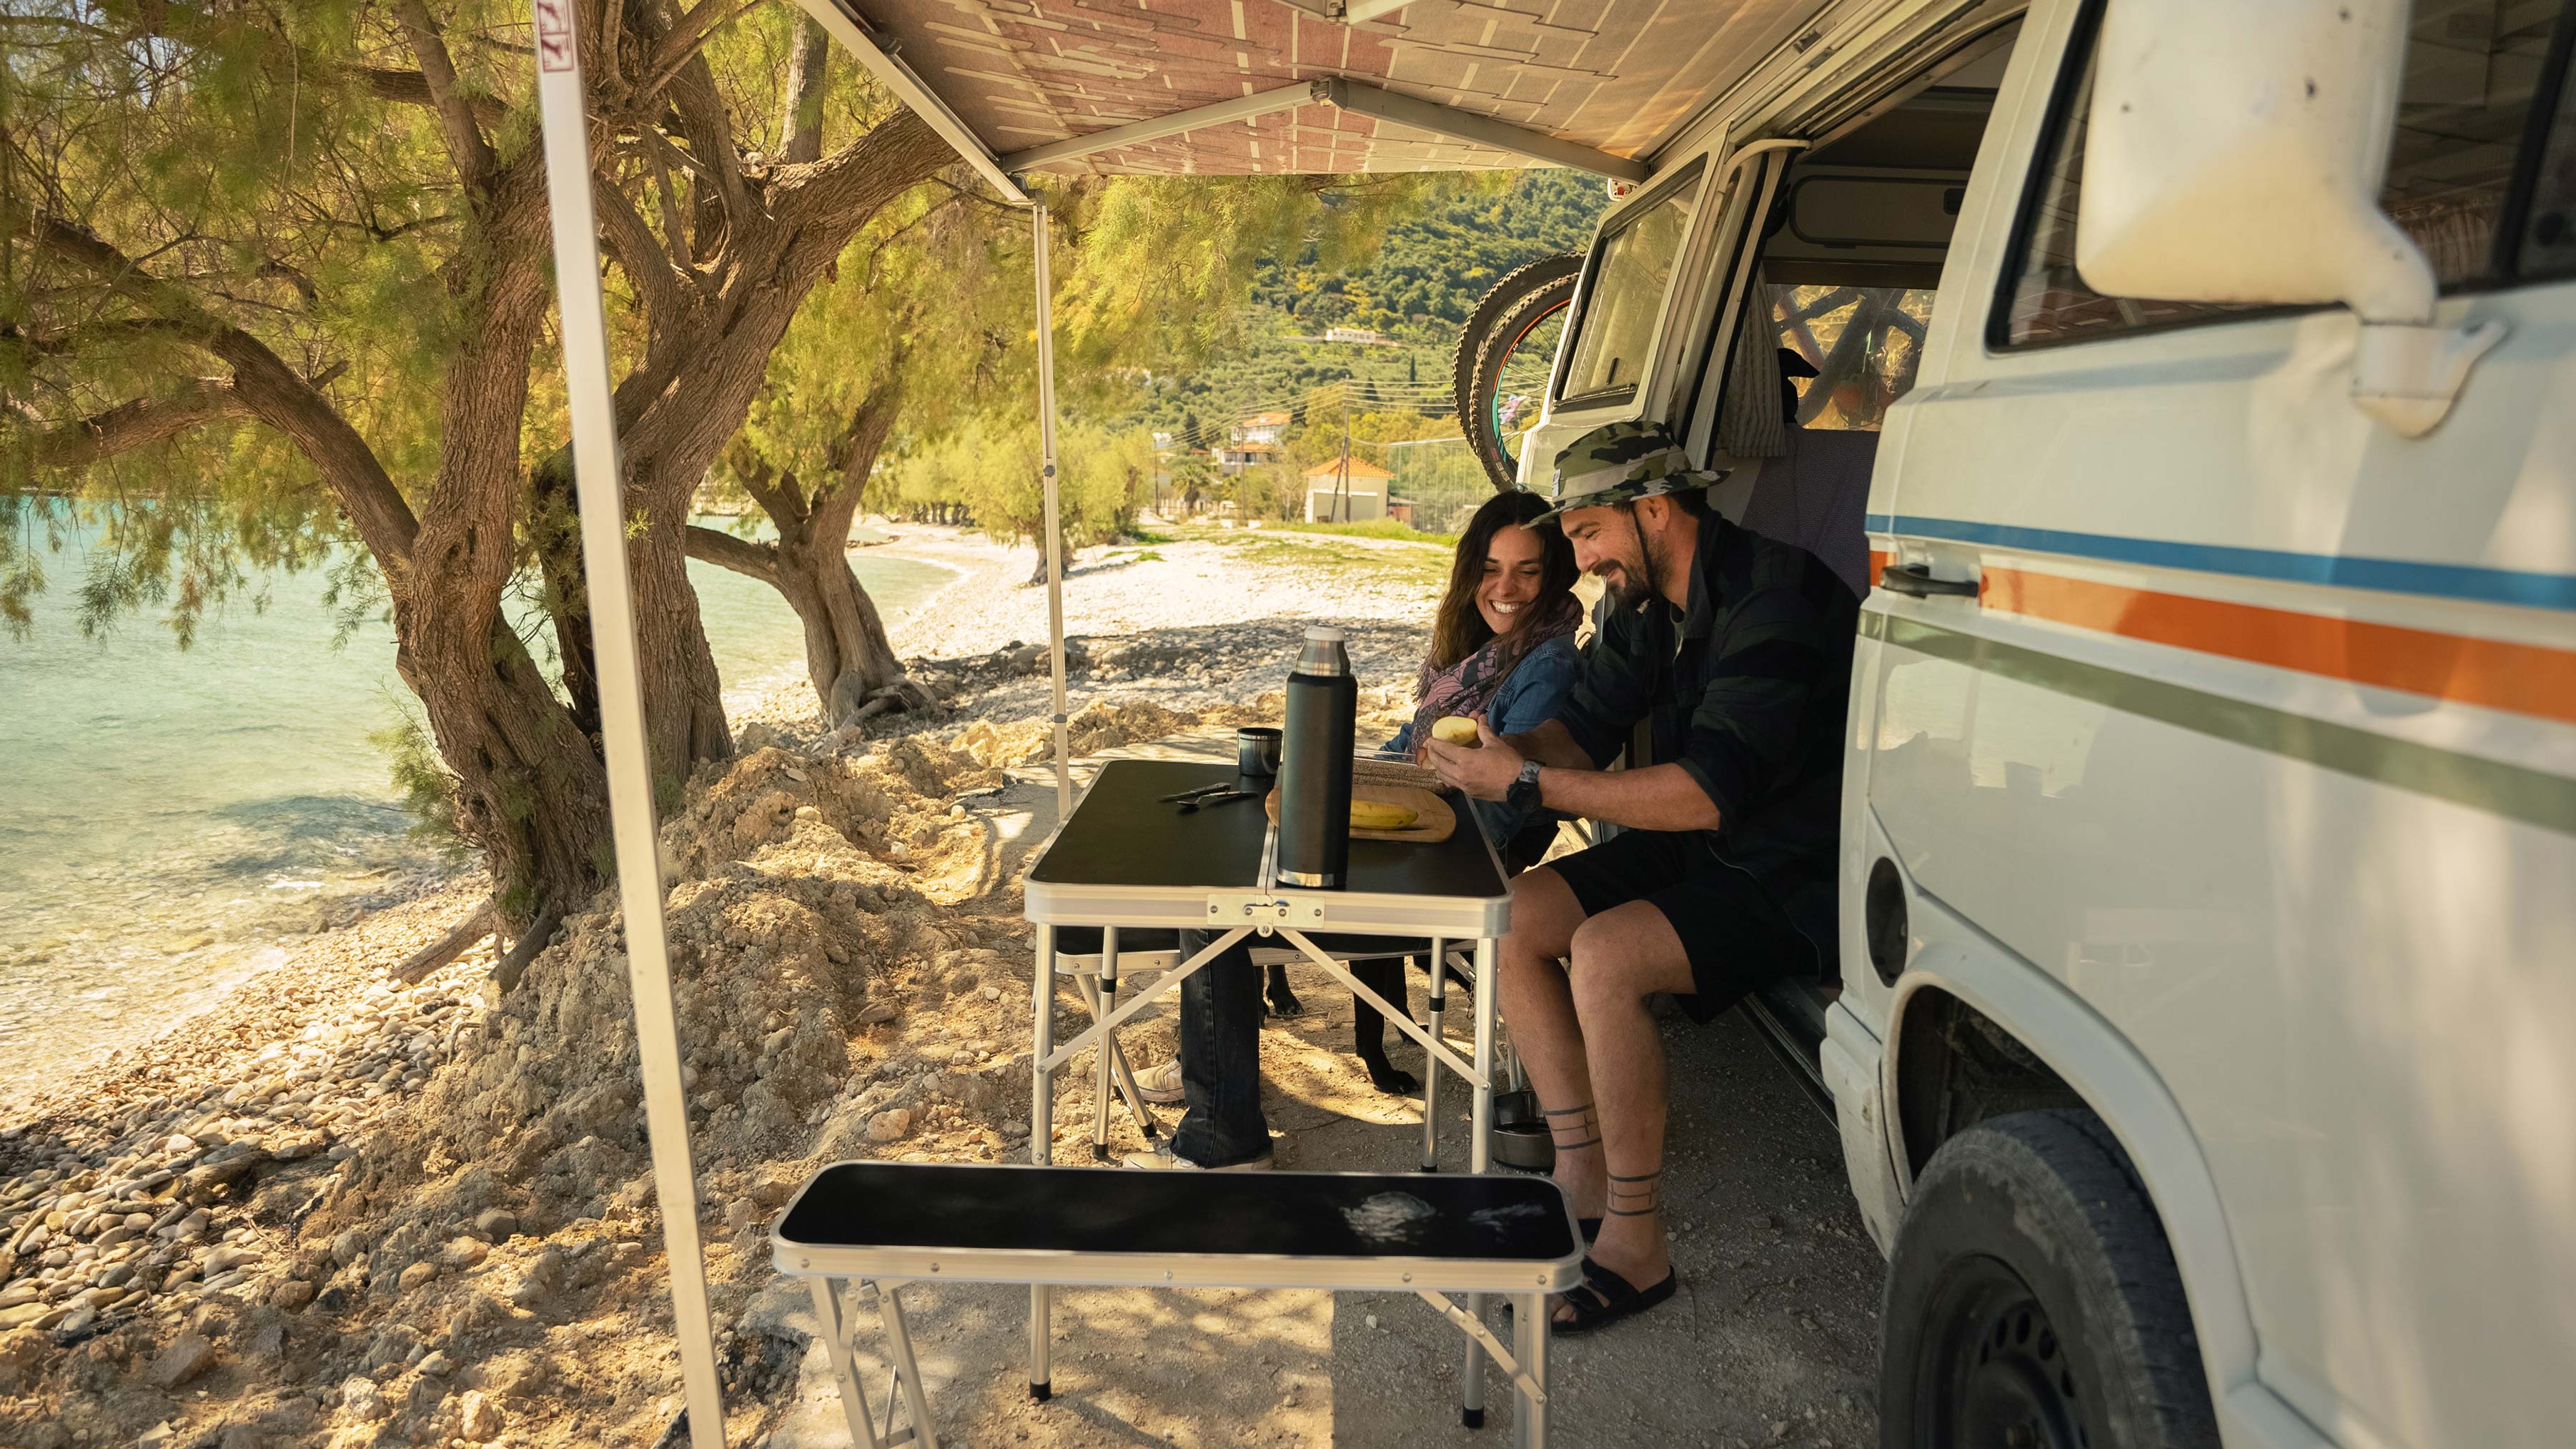 John and Eva prepping a snack in their van